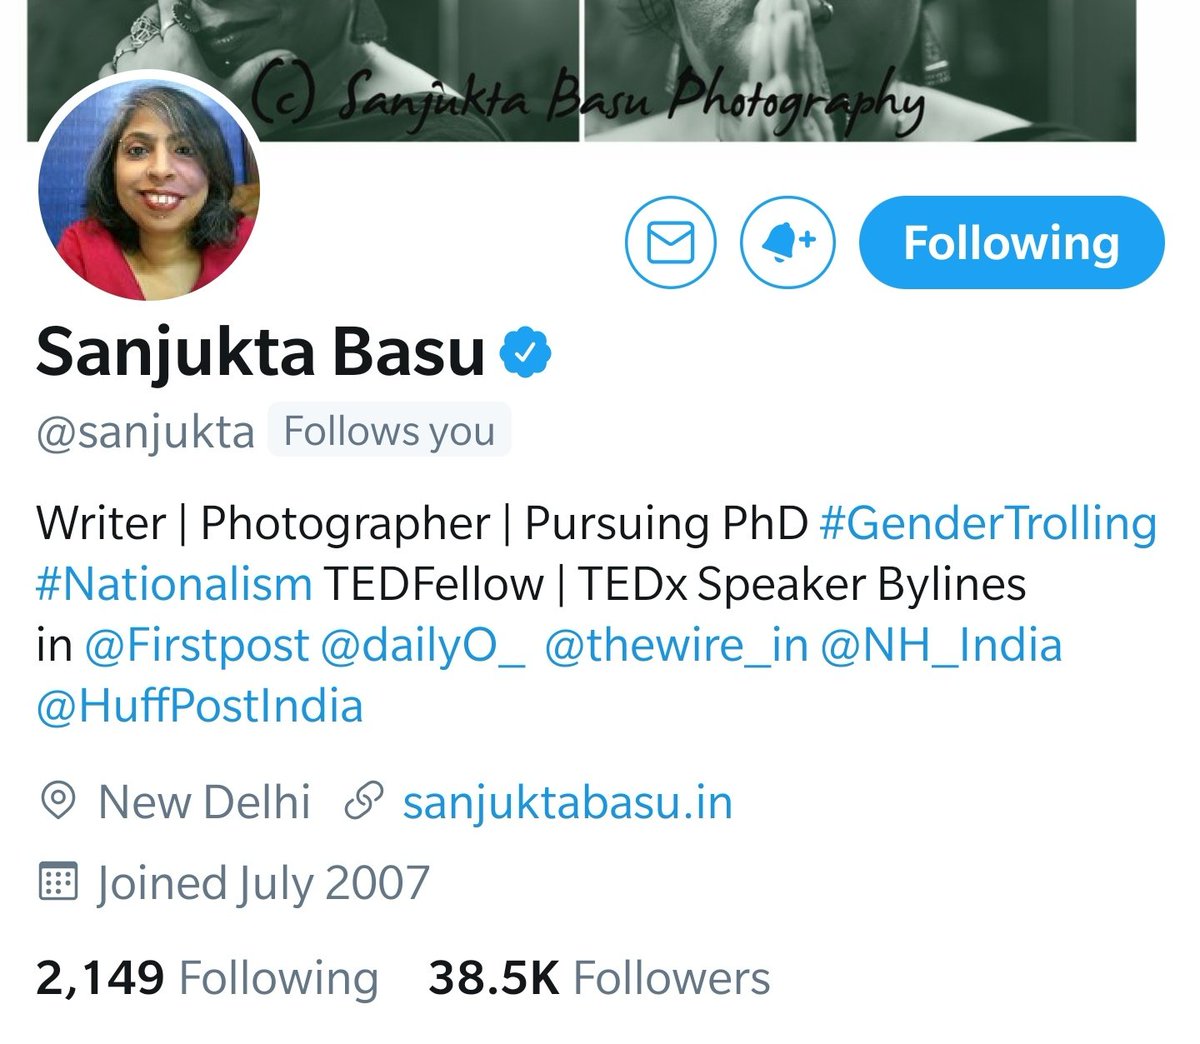 Also  @sanjukta's account is withheld in India.